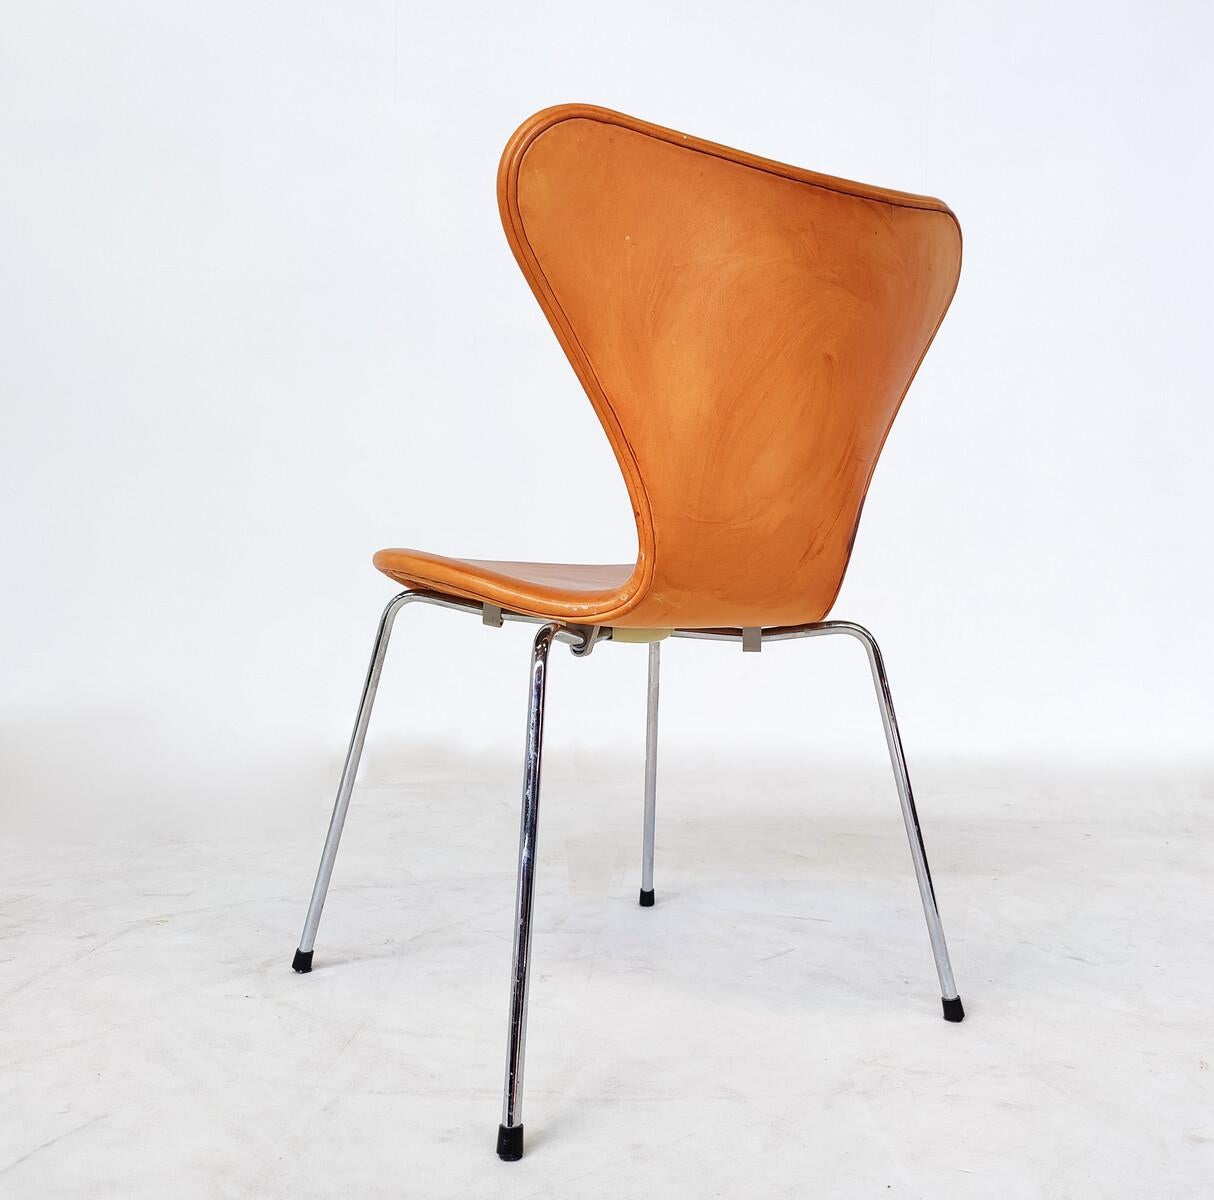 Danish Mid-Century Modern Set of 6 Cognac Leather Chairs by Arne Jacobsen